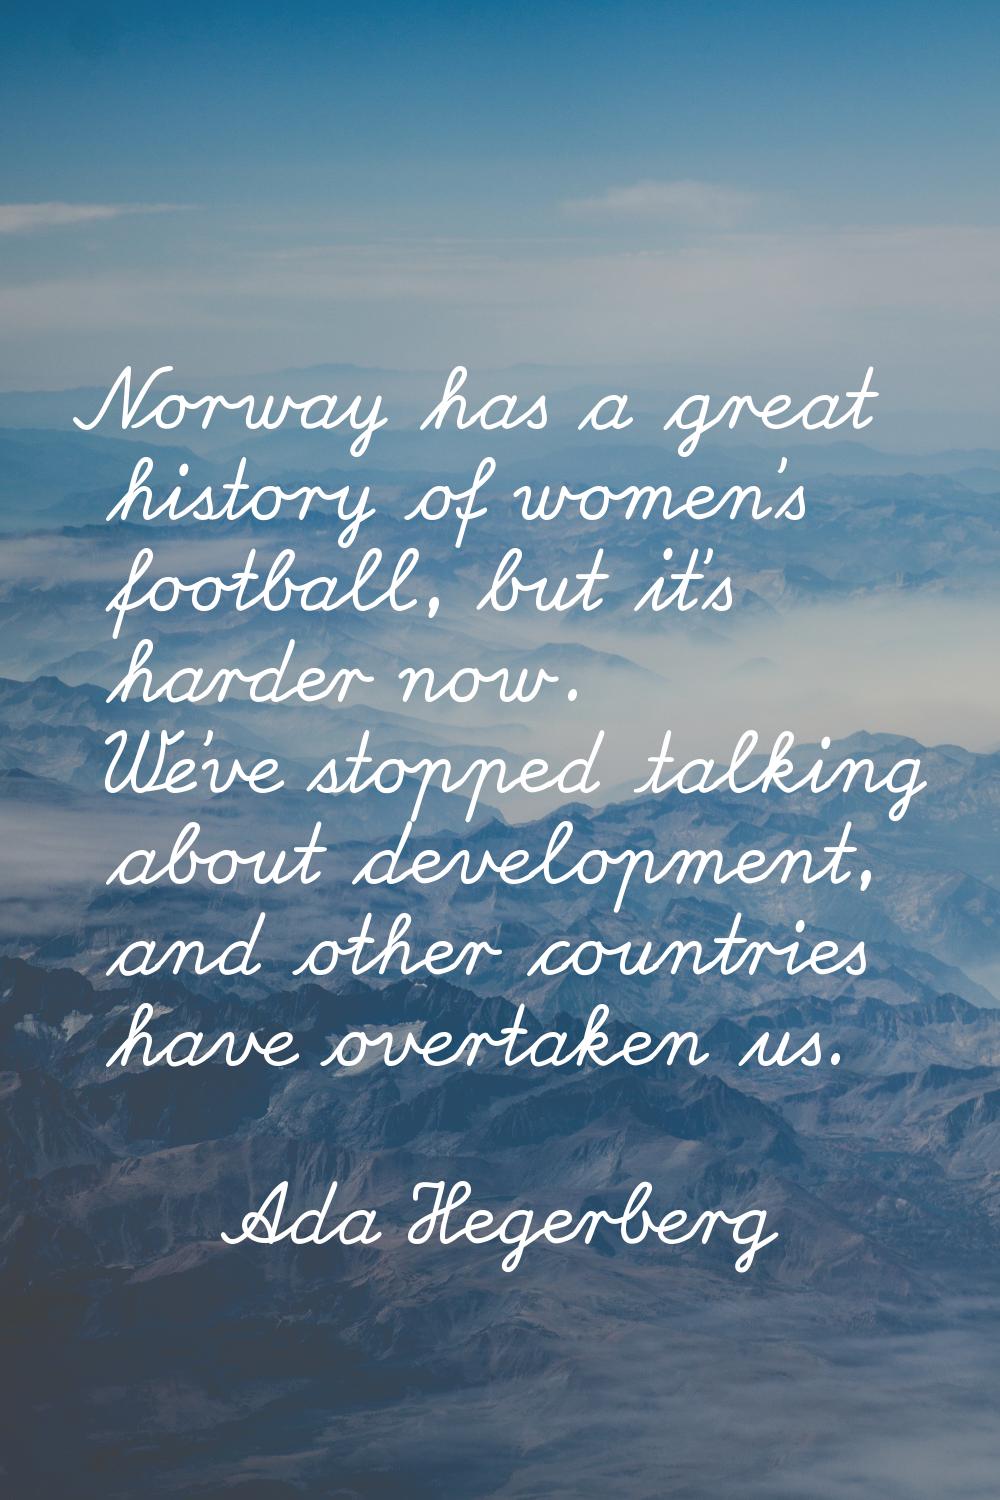 Norway has a great history of women's football, but it's harder now. We've stopped talking about de